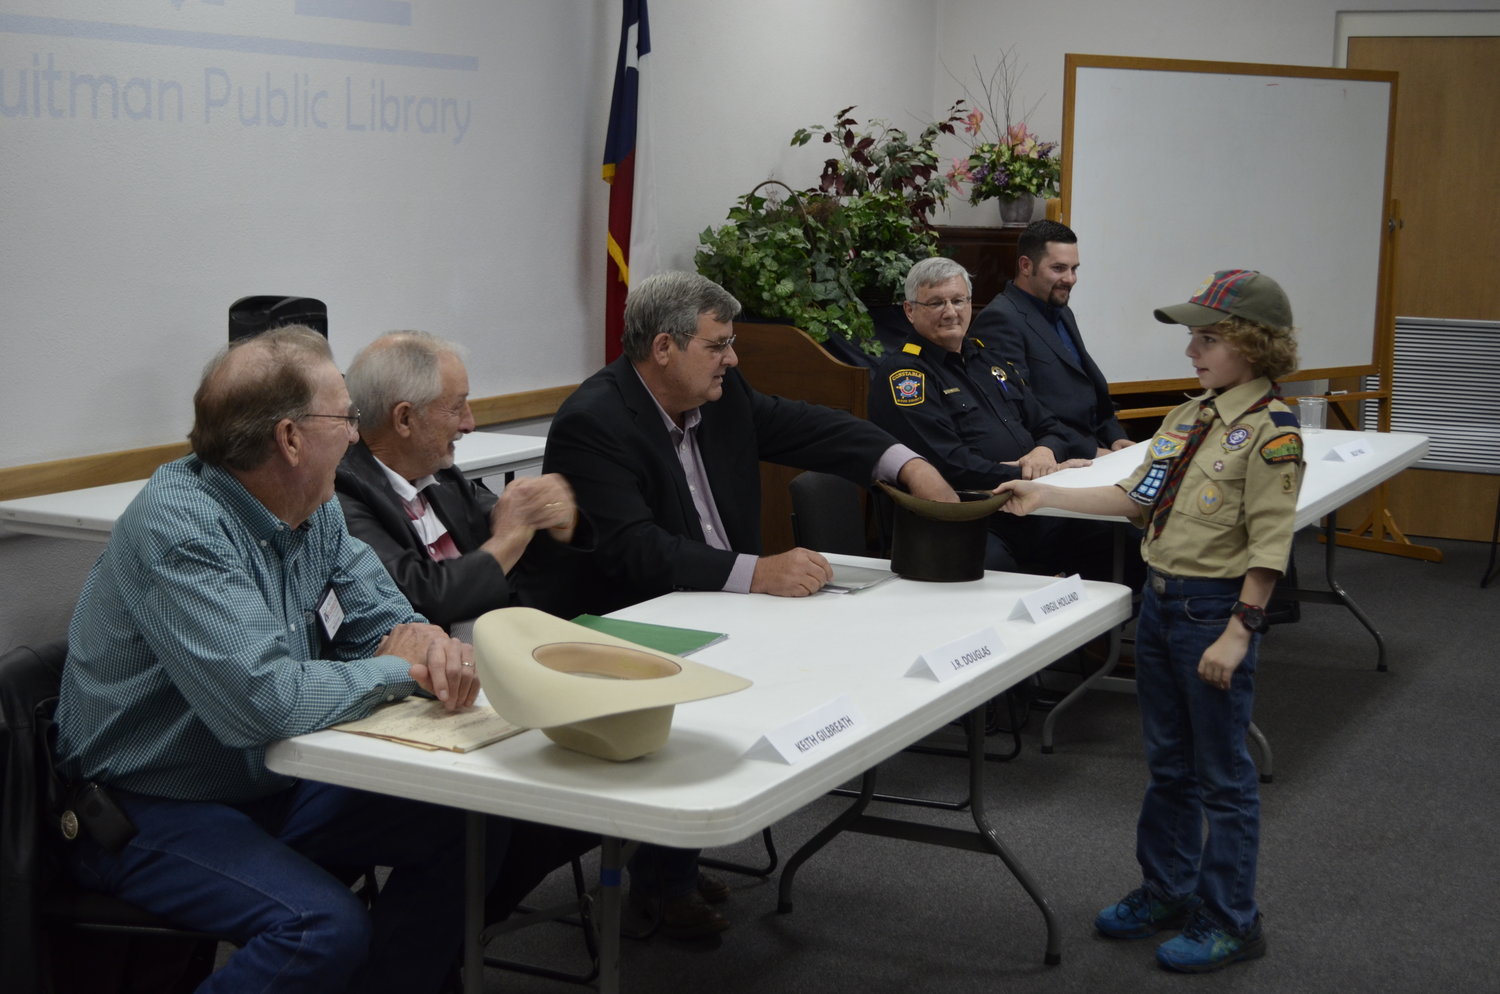 Precinct 1 Commissioner Virgil Holland draws a question from a hat at last Thursday’s candidate forum in Quitman, handled by Quitman Cub Scout Ross Gonyea. Other candidates, from left, include Keith Gilbreath and J.R. Douglas running for commissioner and Steve Bowser and Billy Hill running for constable.